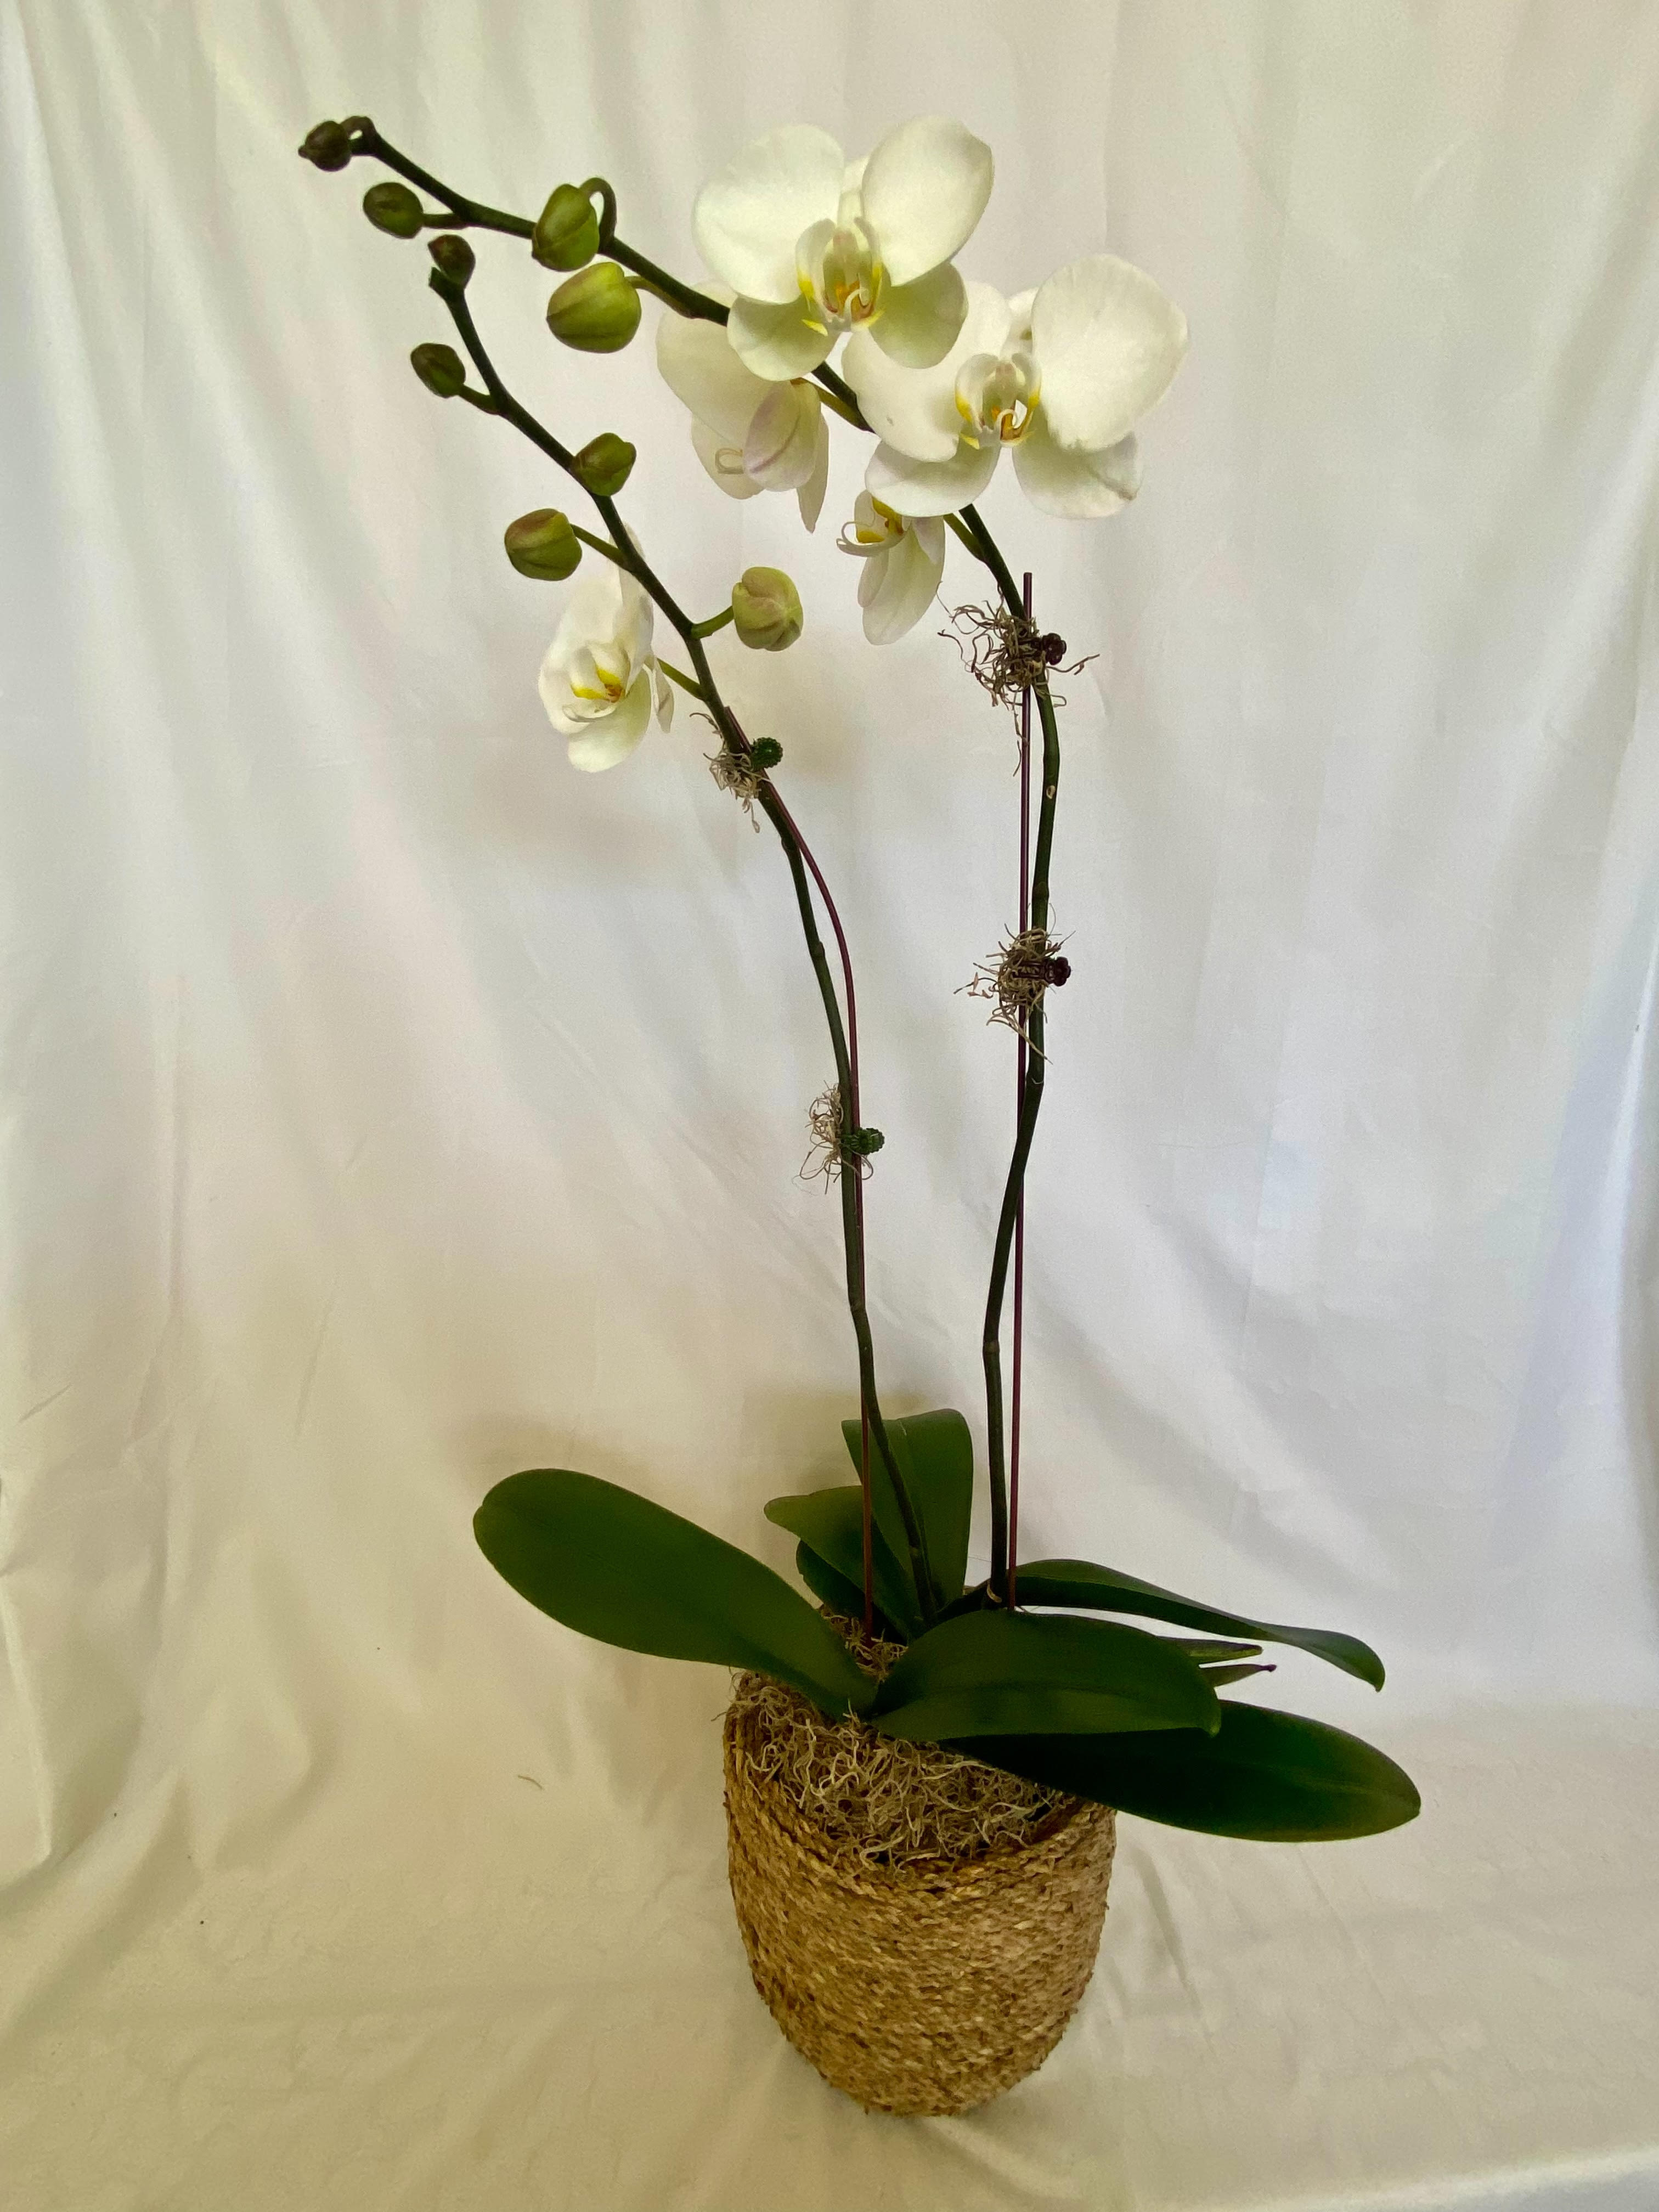 Double orchid in basket vessel - Double White orchid set in moss filled basket vessel.